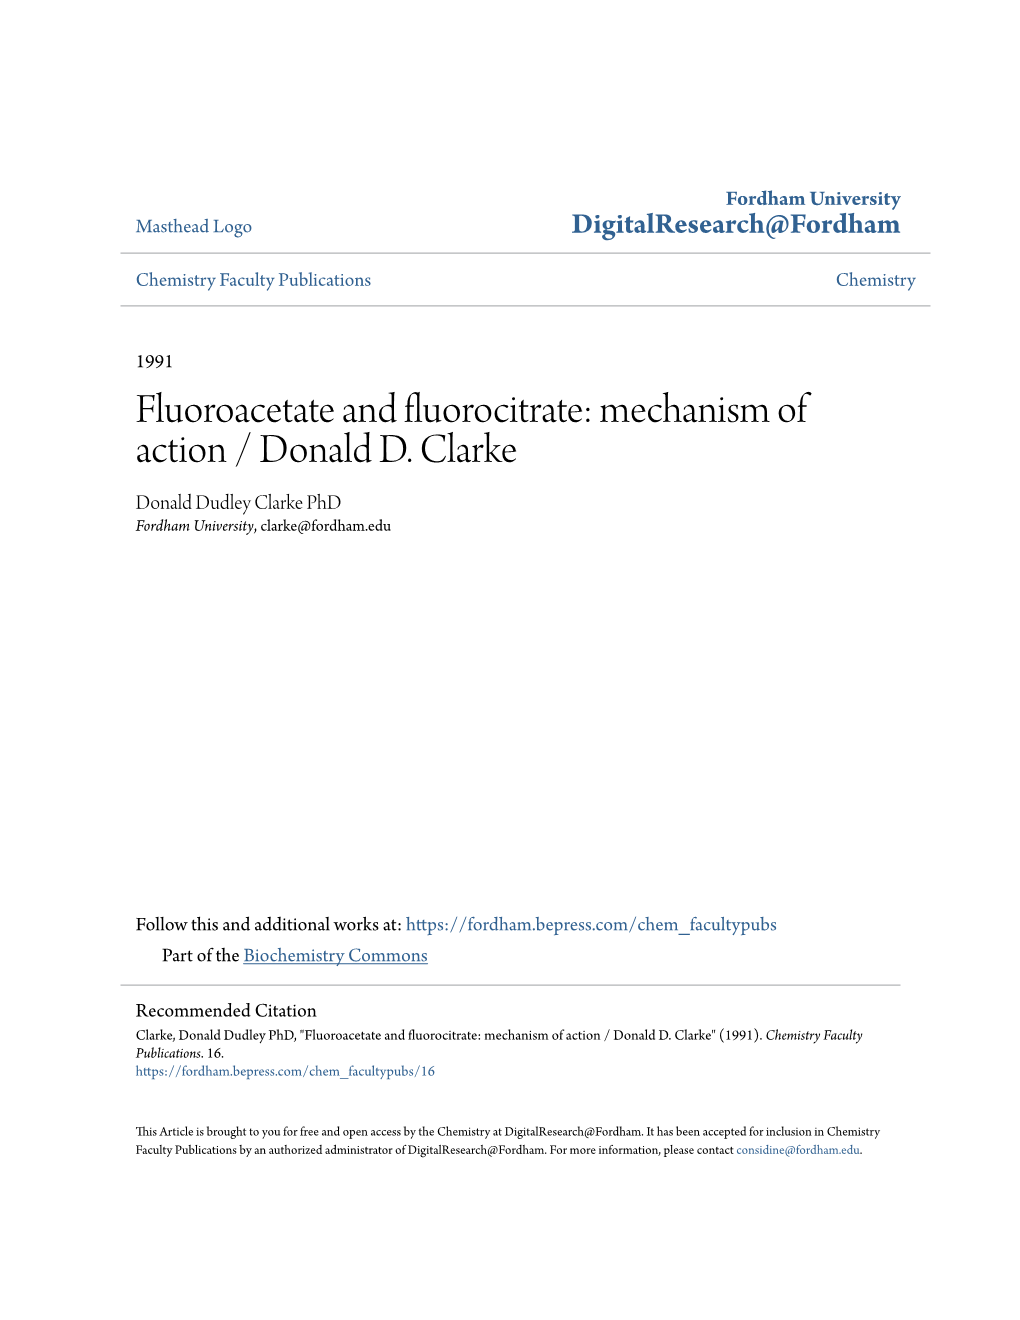 Fluoroacetate and Fluorocitrate: Mechanism of Action / Donald D